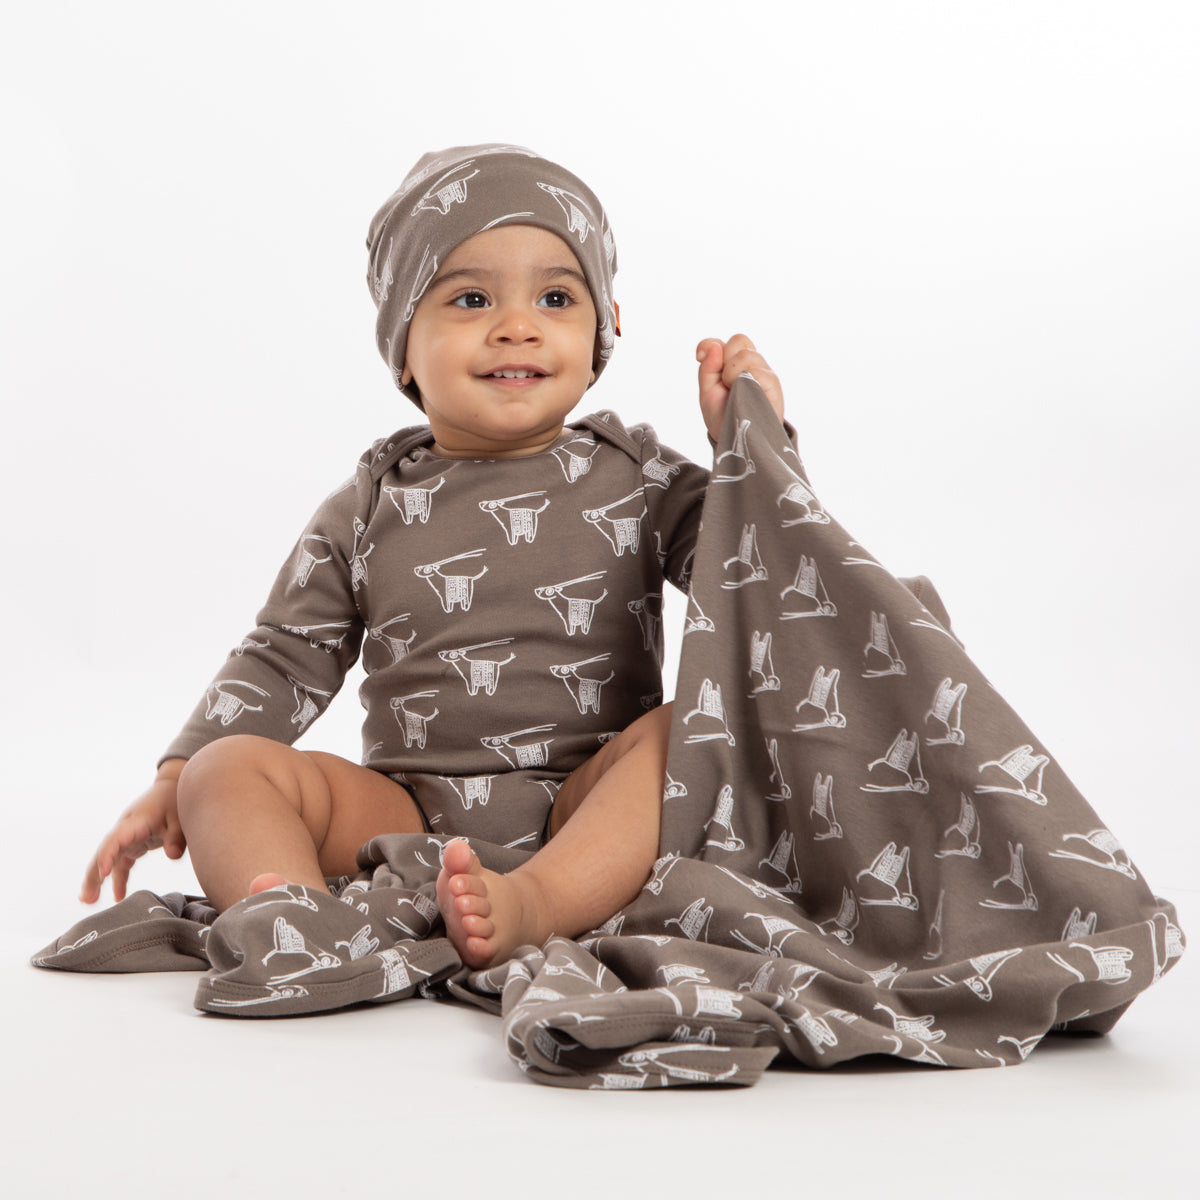 Organic 6-Piece baby set packed in a box - Baby Elephant Organic Wear